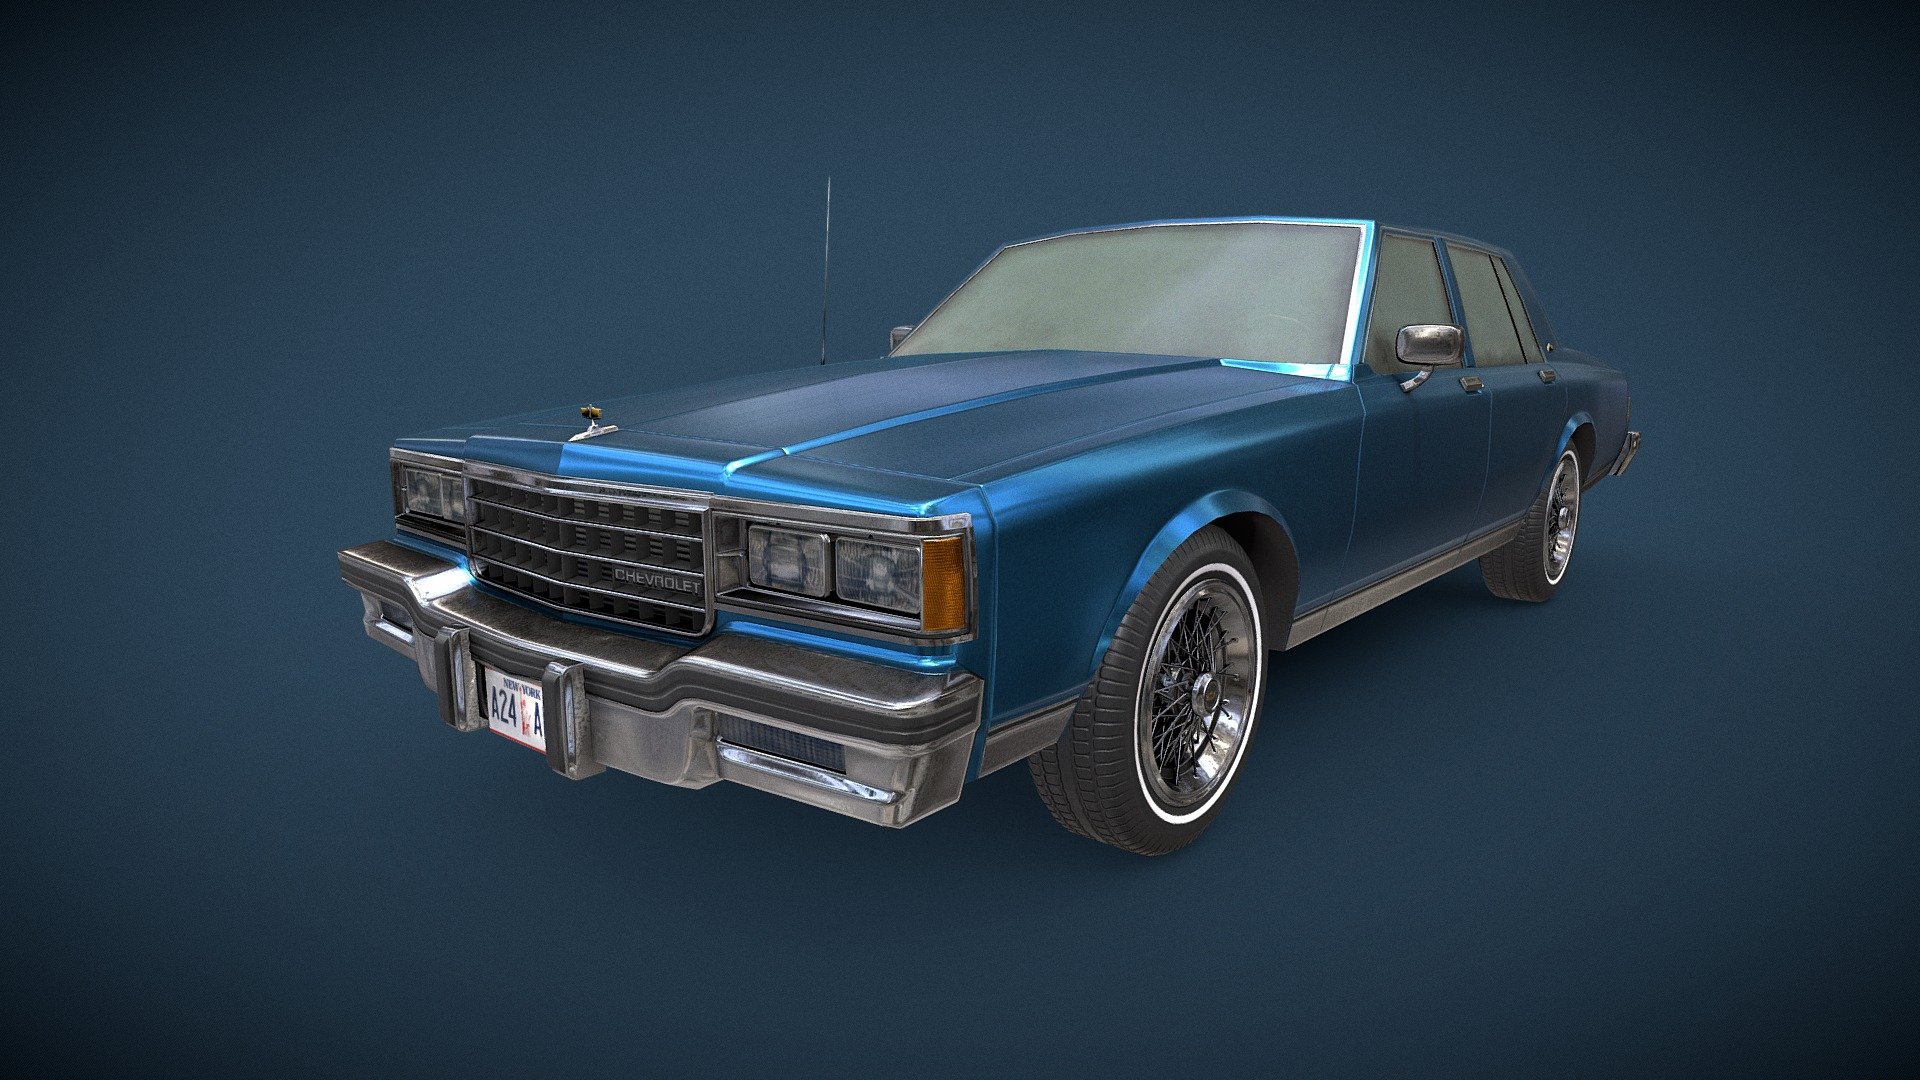 Low poly model to Unreal Engine 5. Model: Blender, Textures: Substance Painter - Chevrolet Caprice 1985 - 3D model by triget 3d model